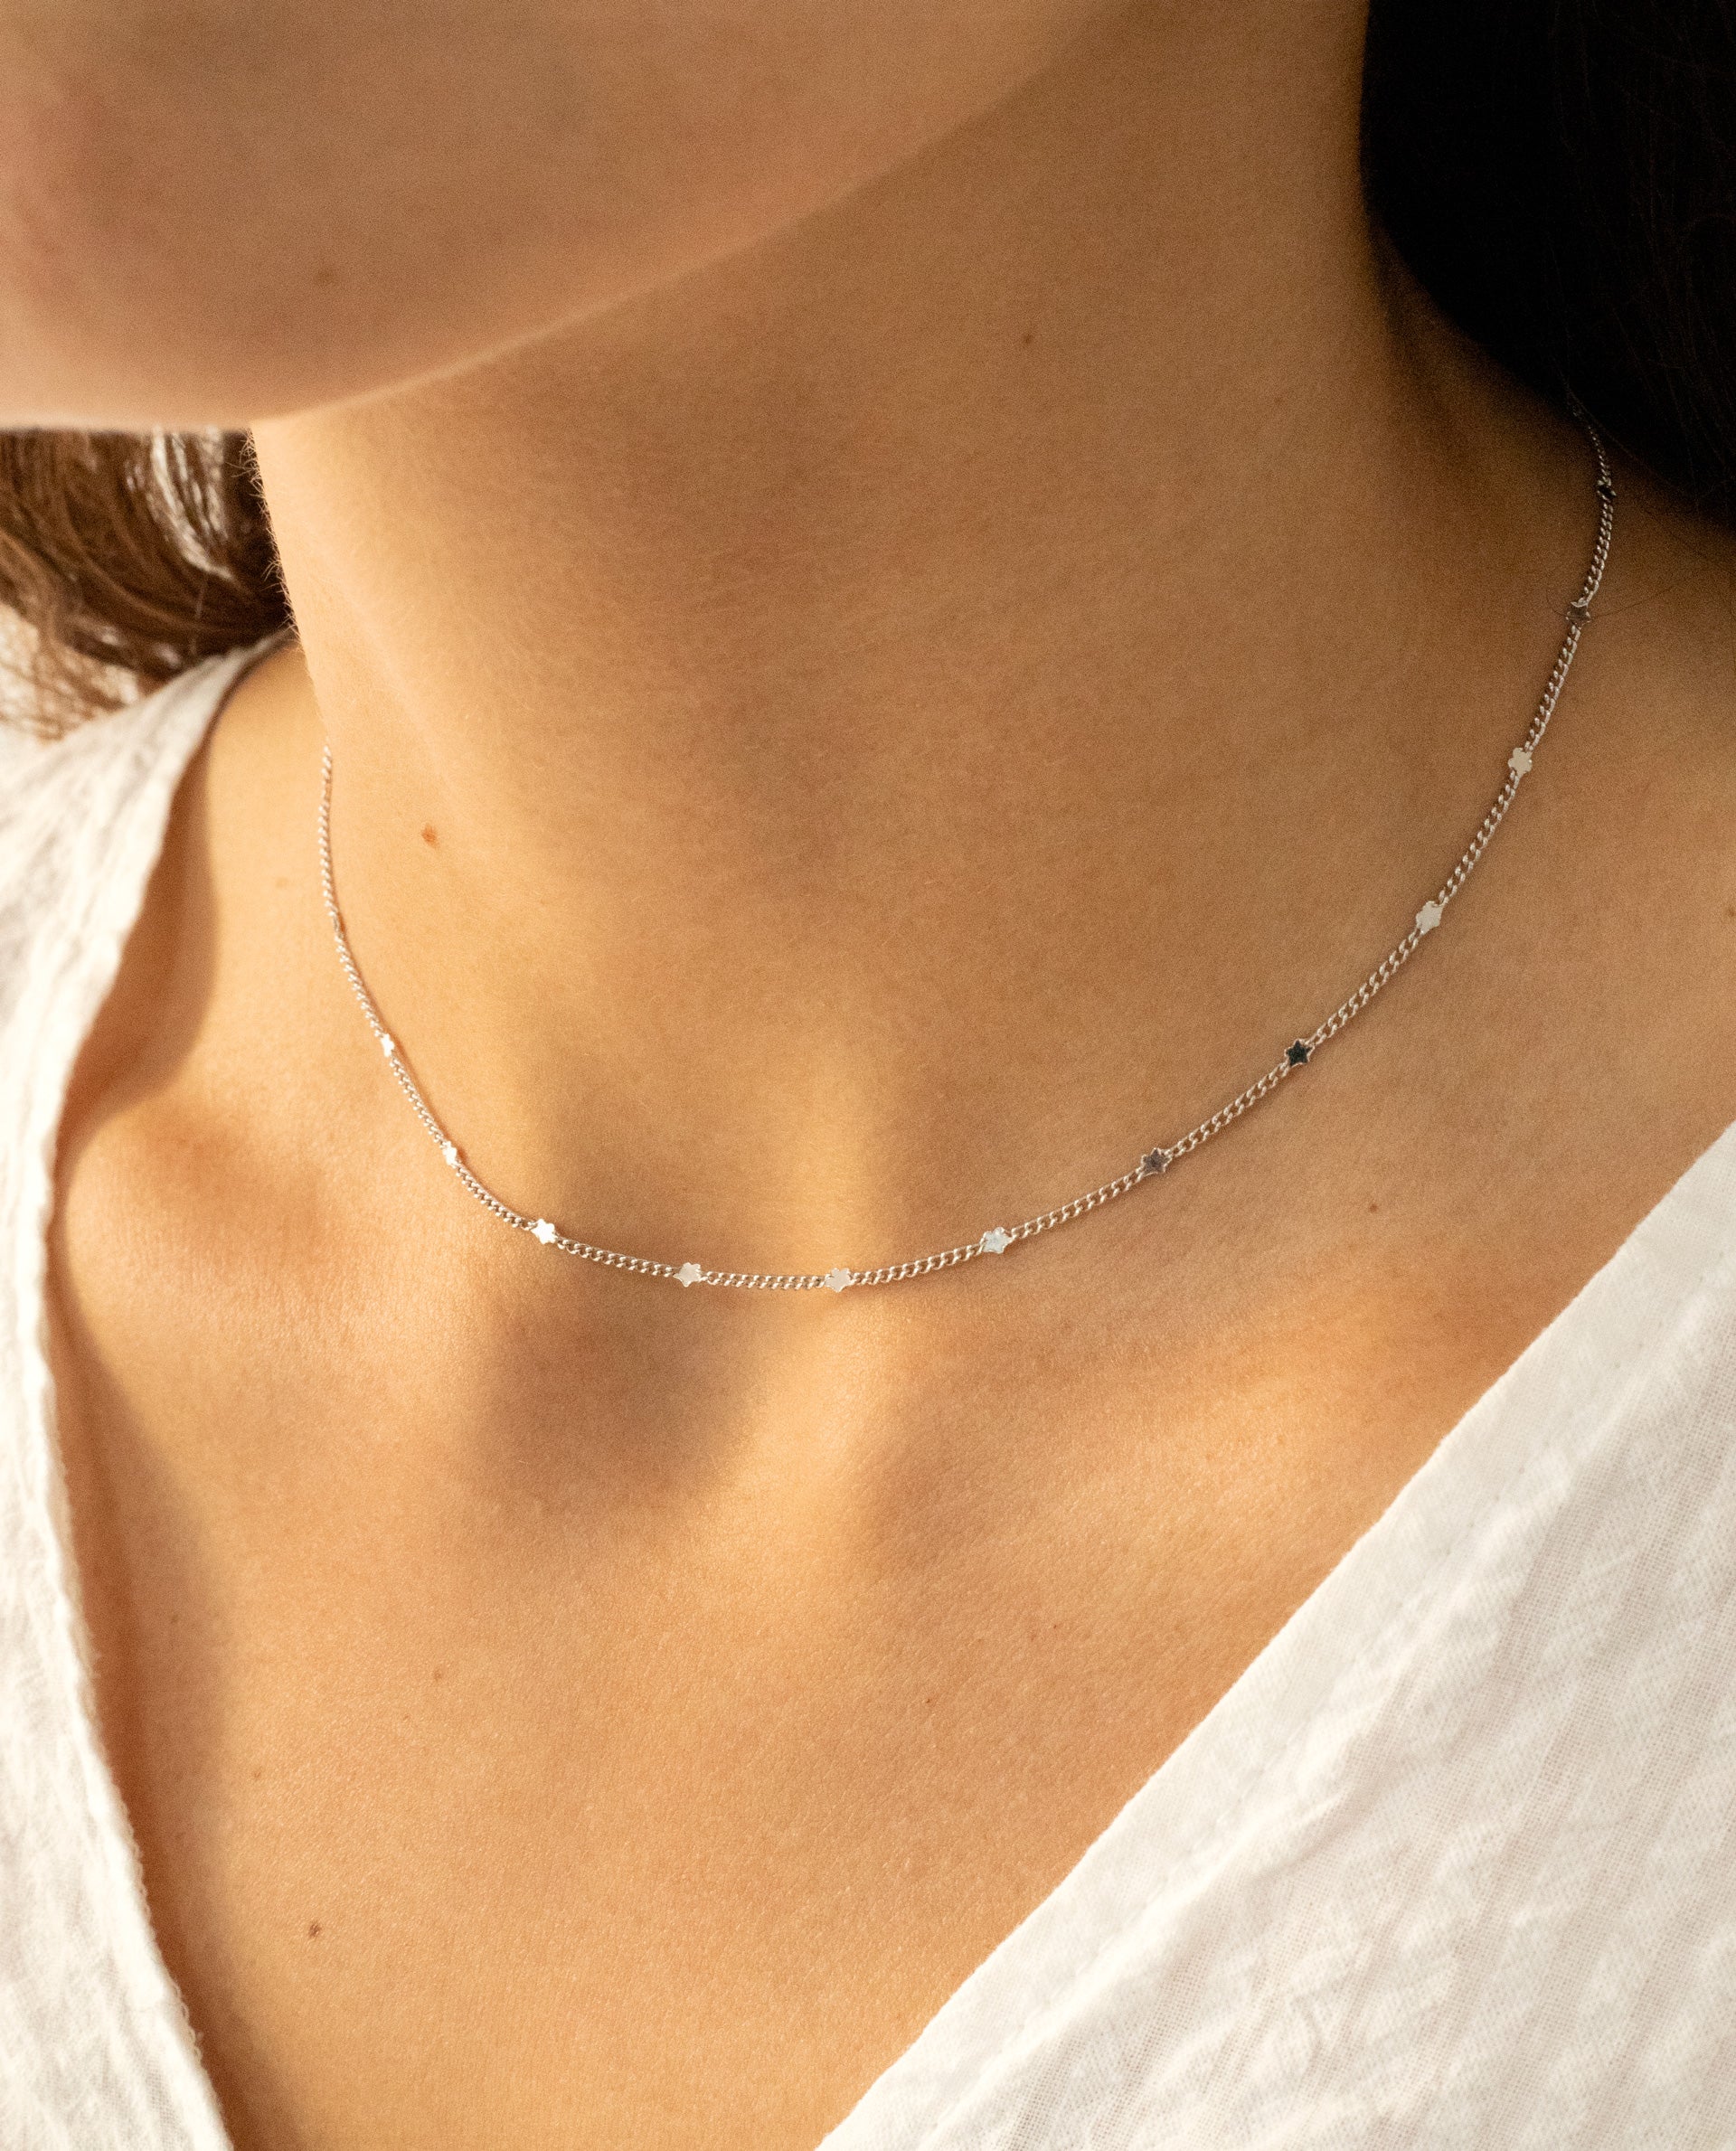 NECKLACE ALL MY STARS - SILVER